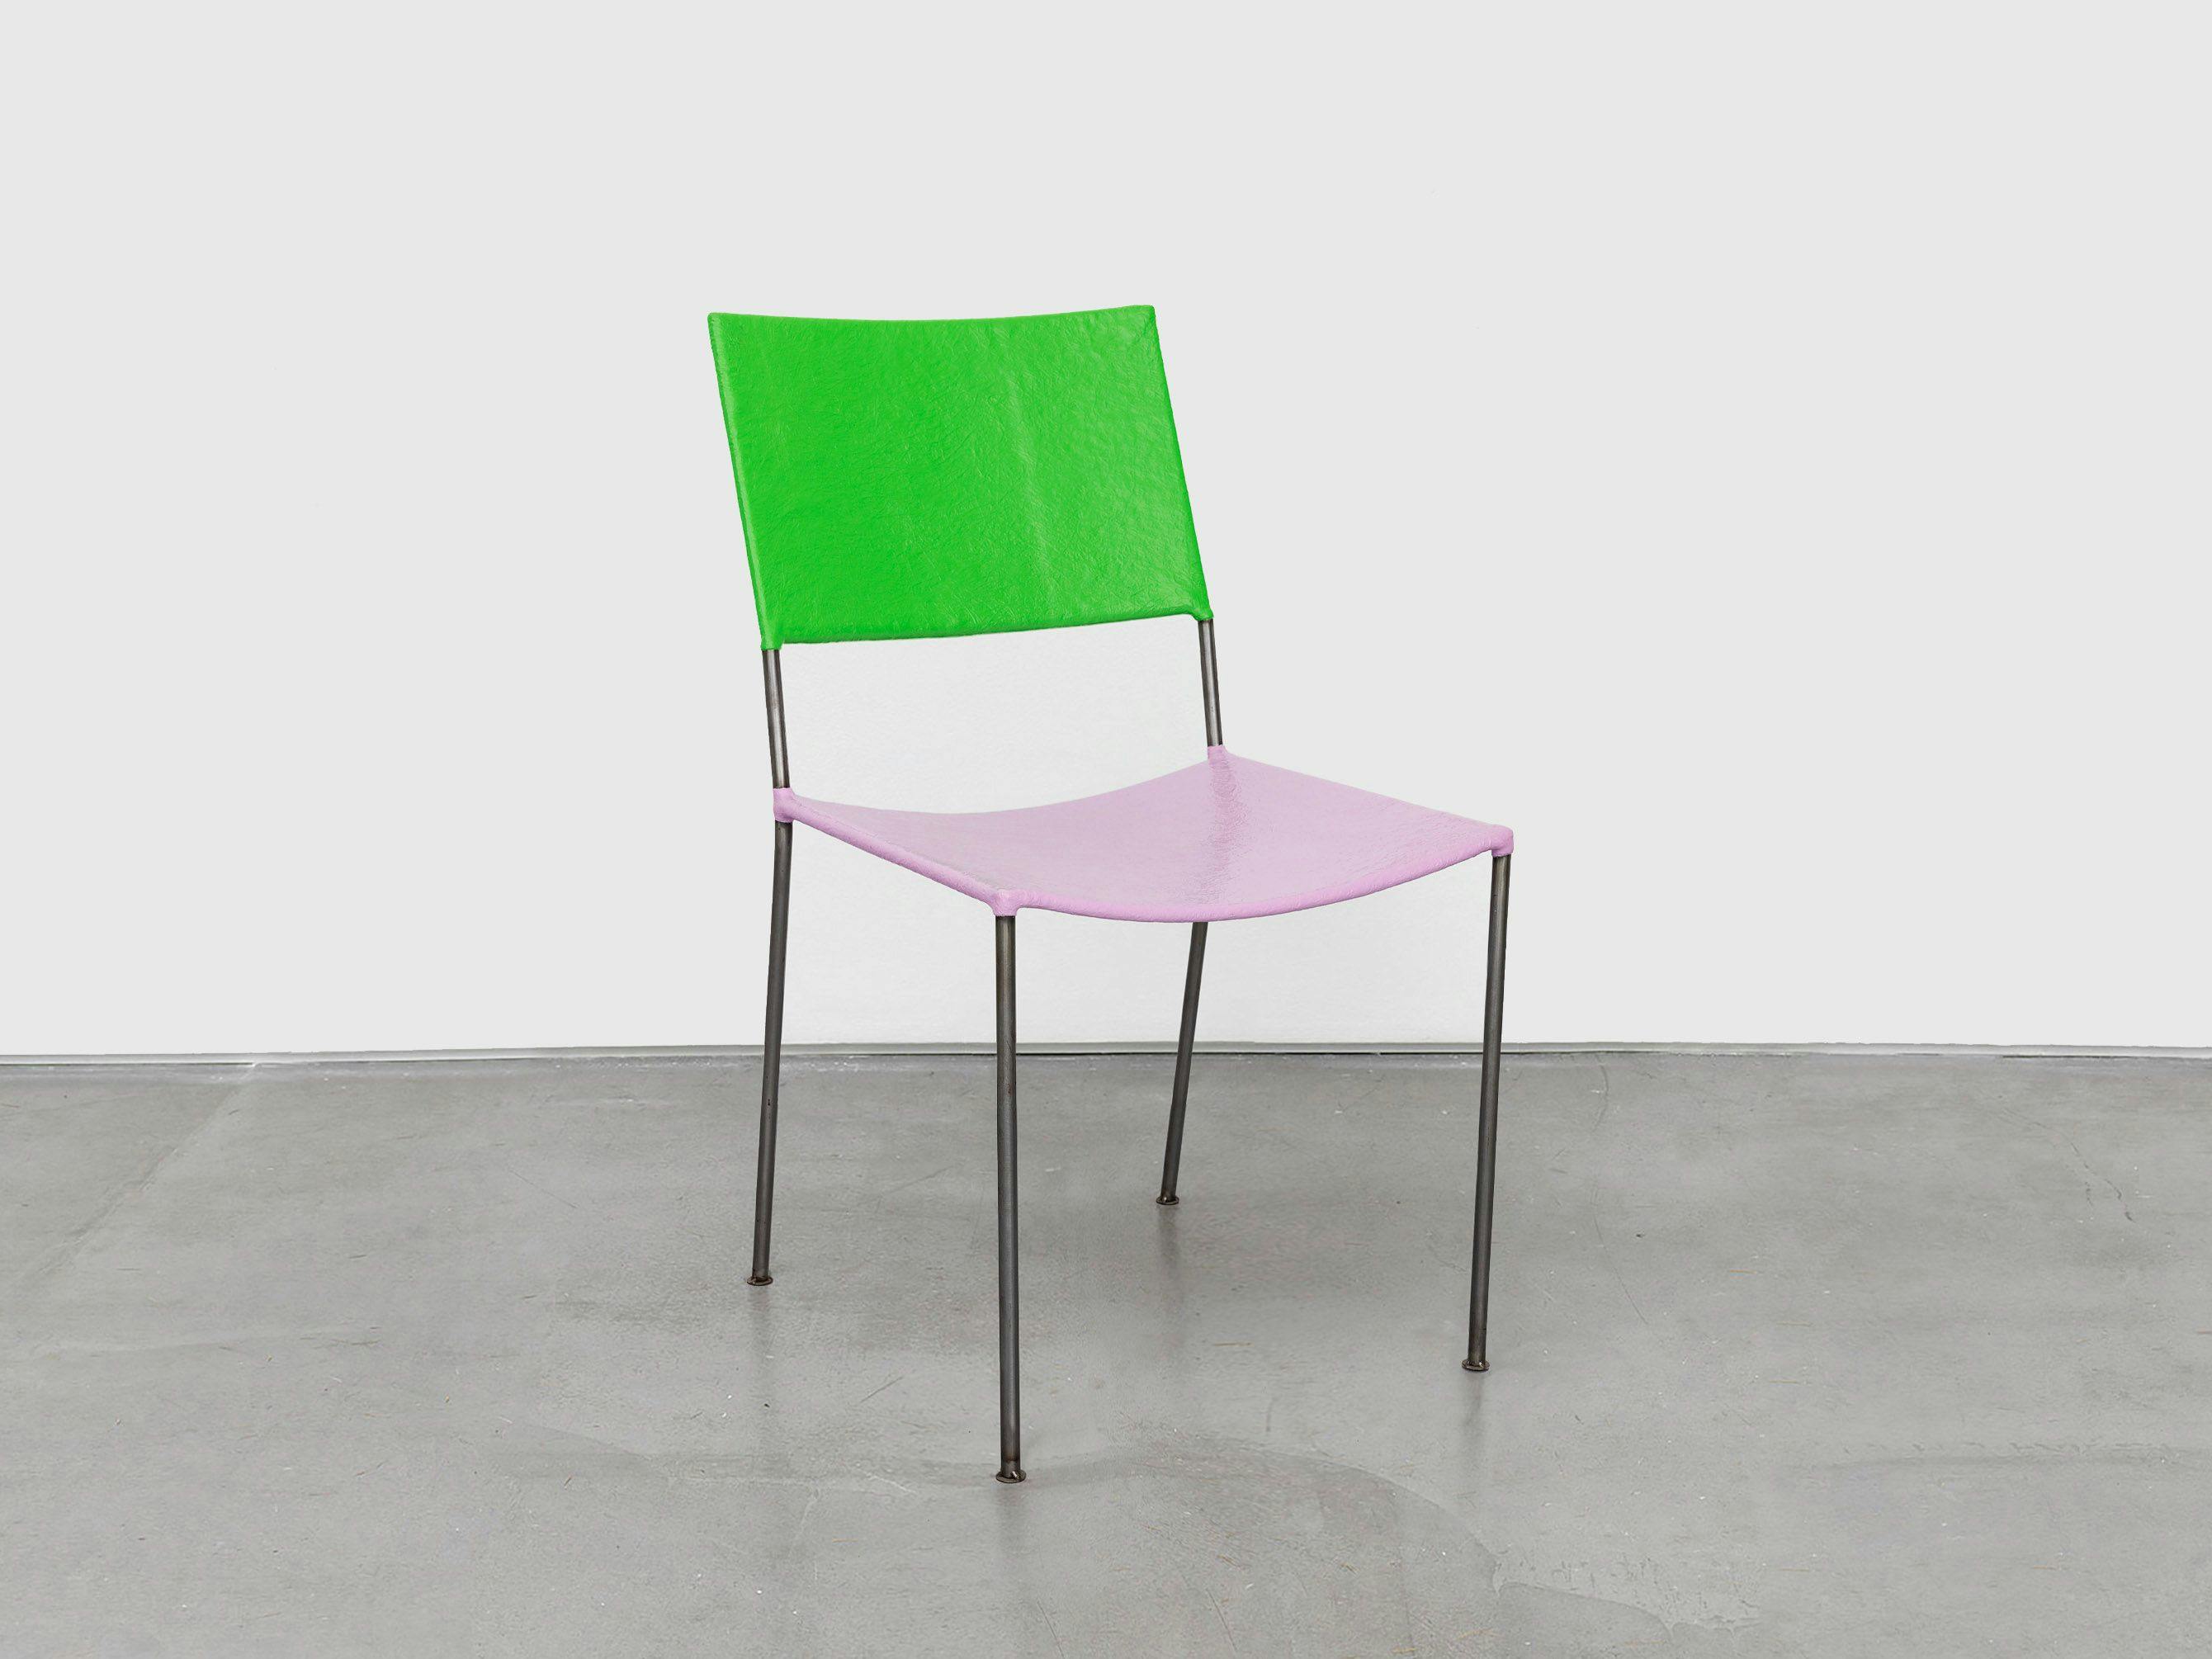 A furniture by Franz West, titled ﻿Künstlerstuhl (Artist's Chair), dated in 2006 and 2022.